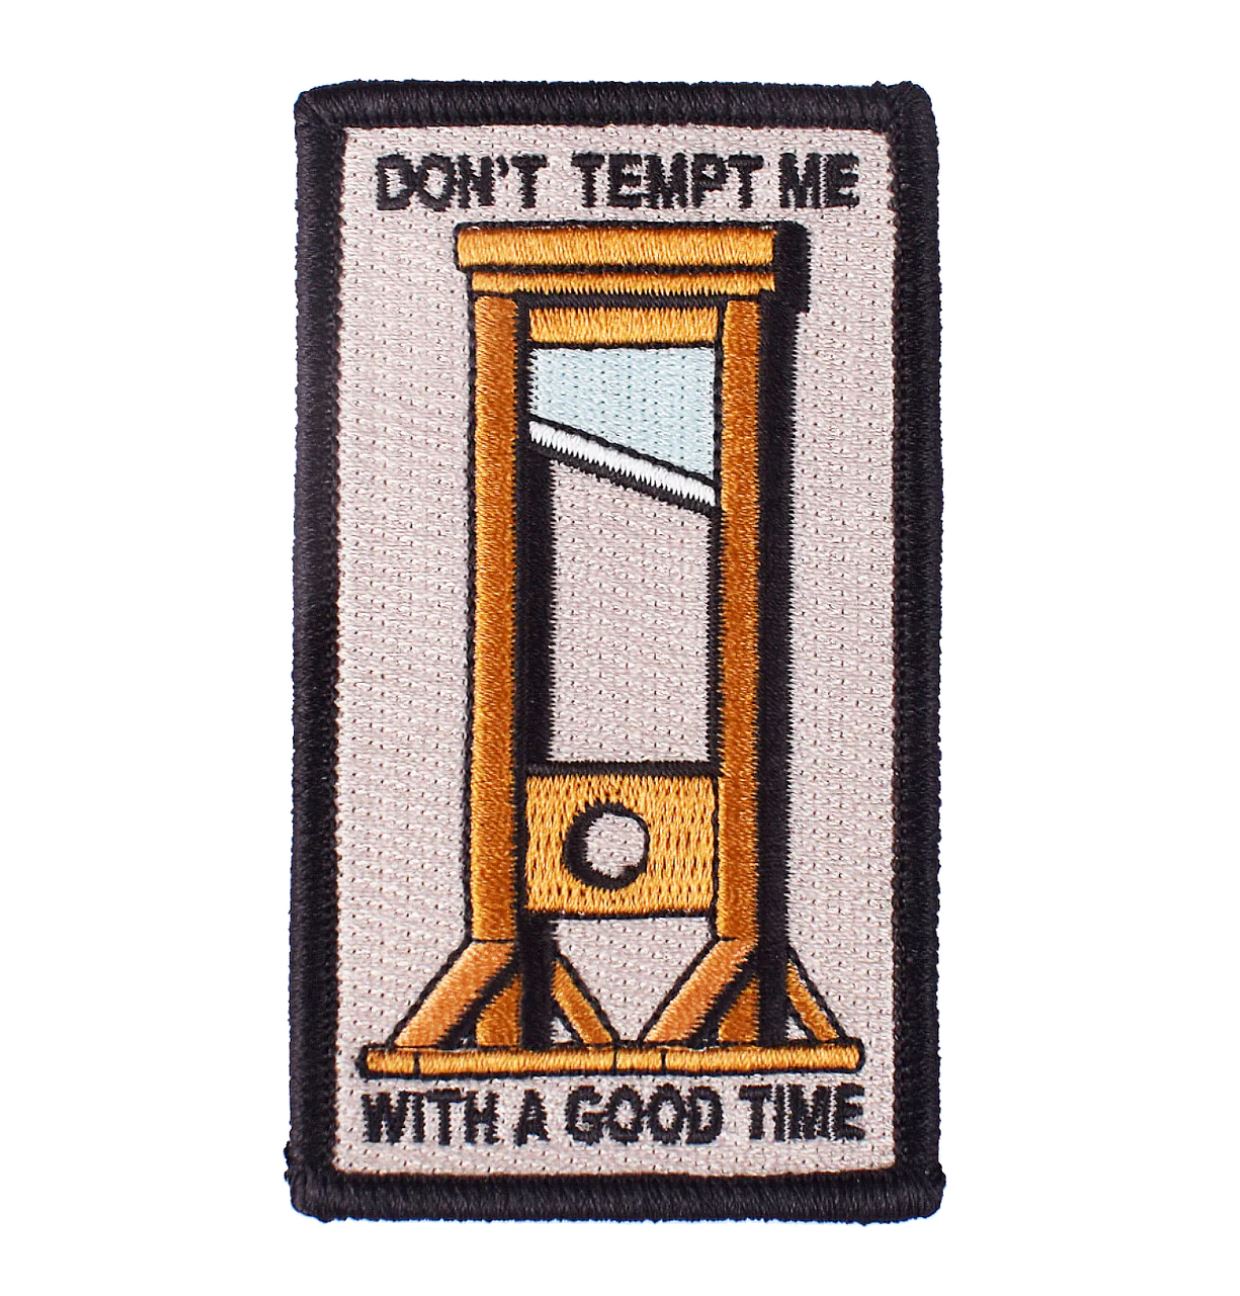 Don't Tempt Me Embroidered Patch x Retrograde Supply Co. - Third Drawer Down